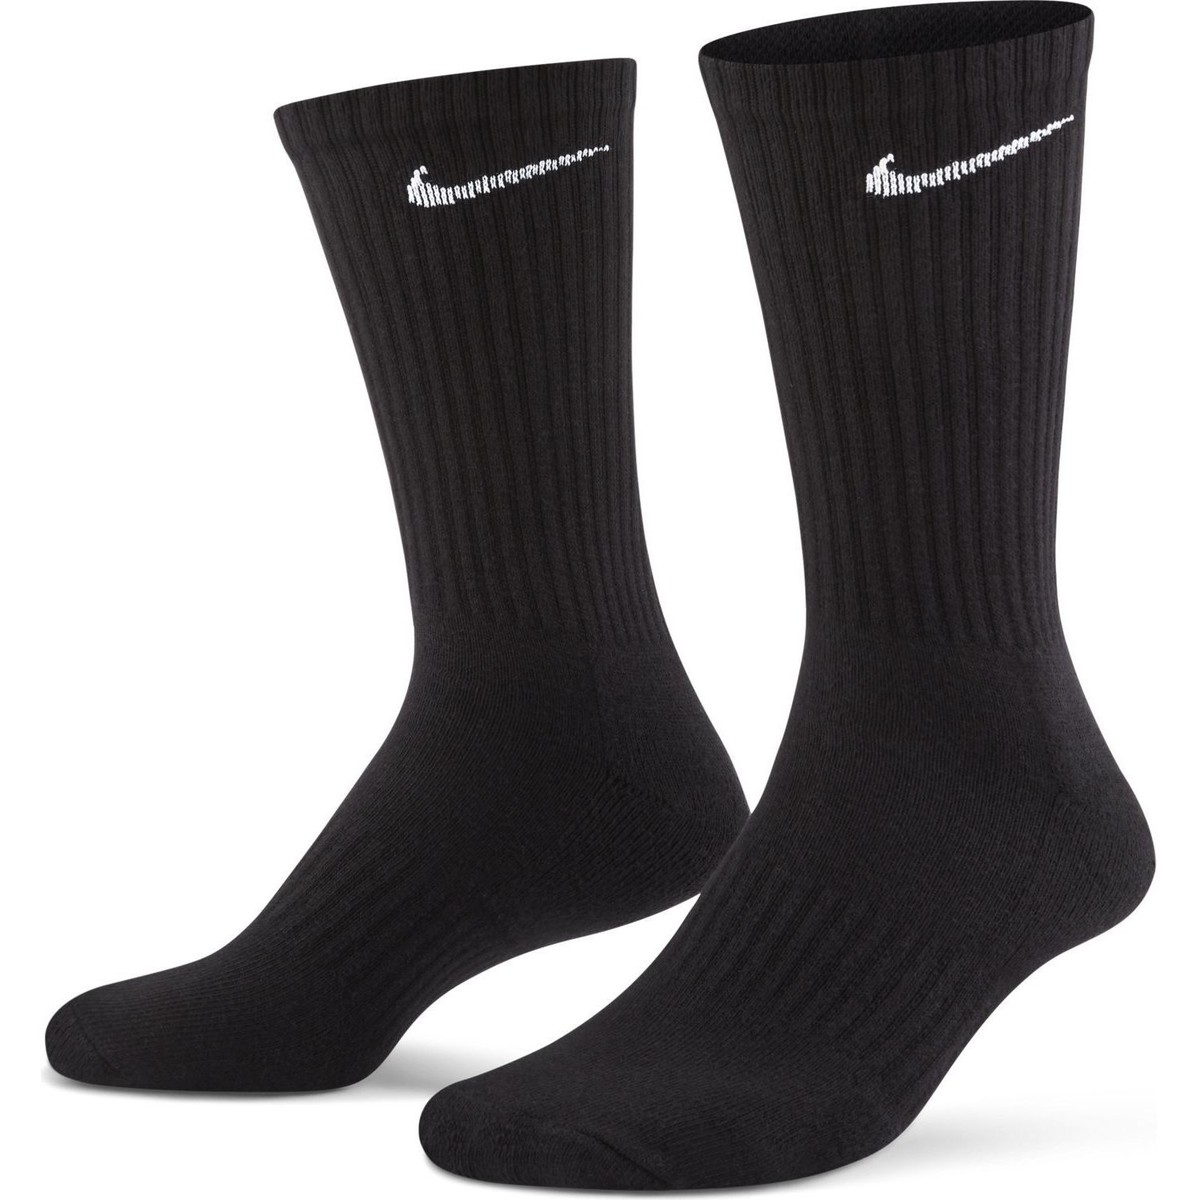 Nike Noir Chaussettes Everyday Cushioned 3 Paires trYAQ